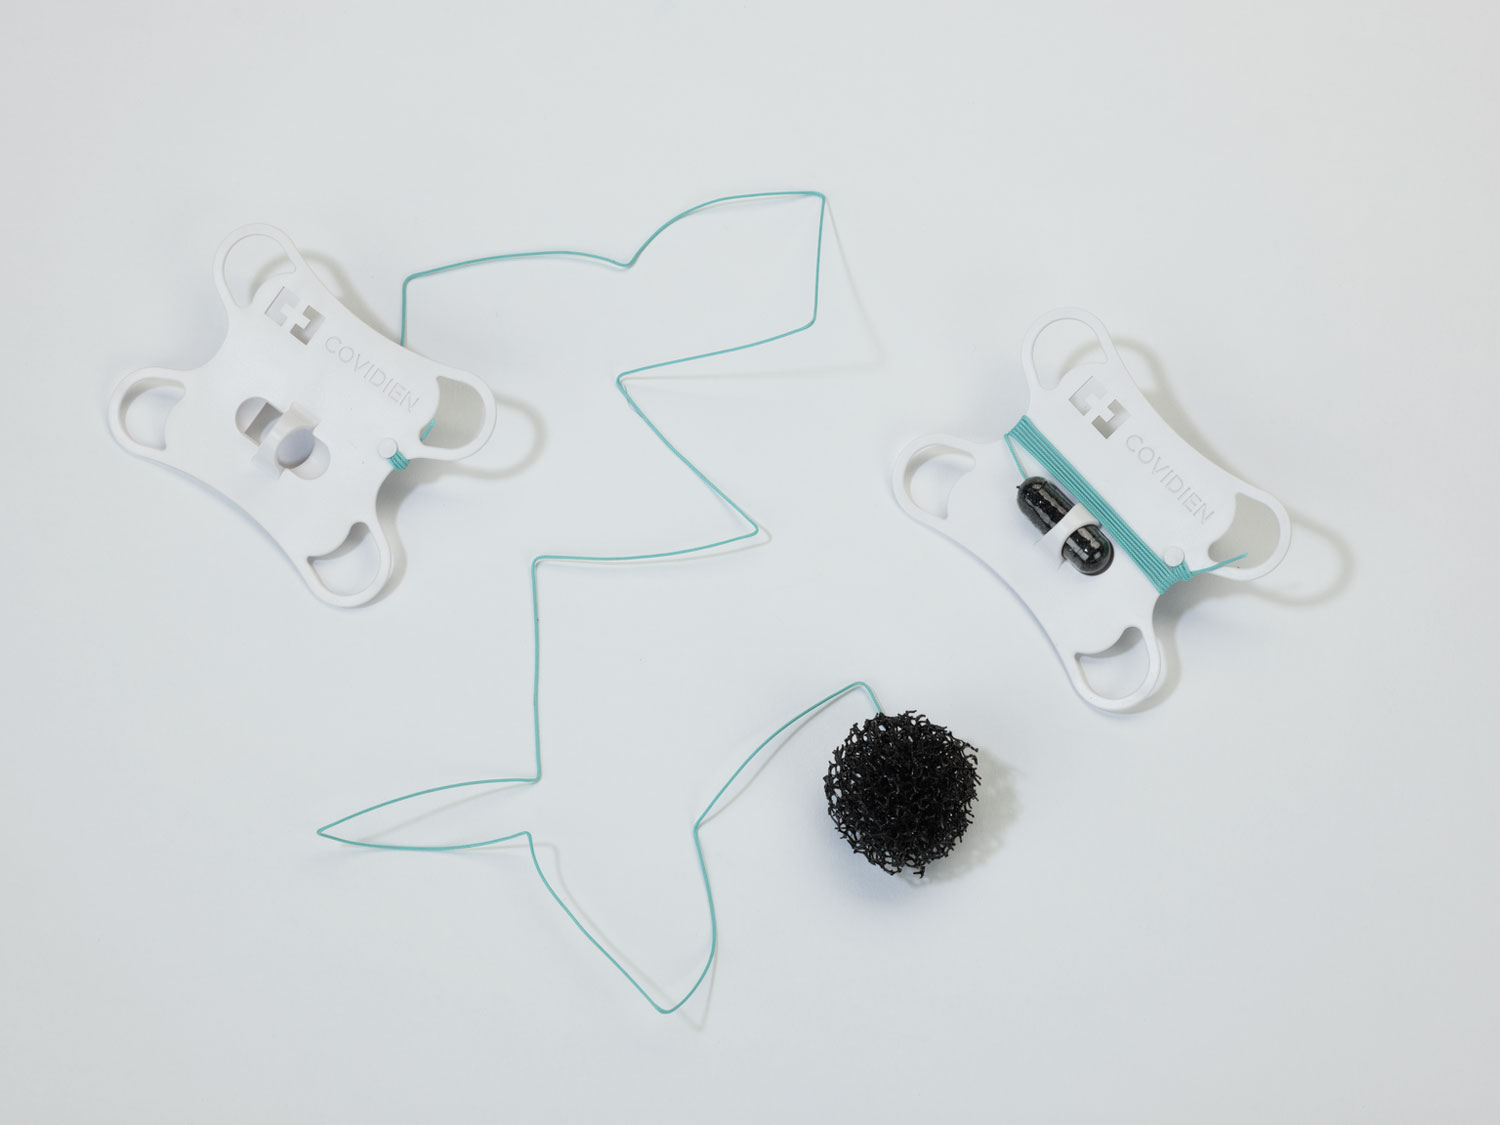 A black sponge ball at the end of a wire, attached to a white handle